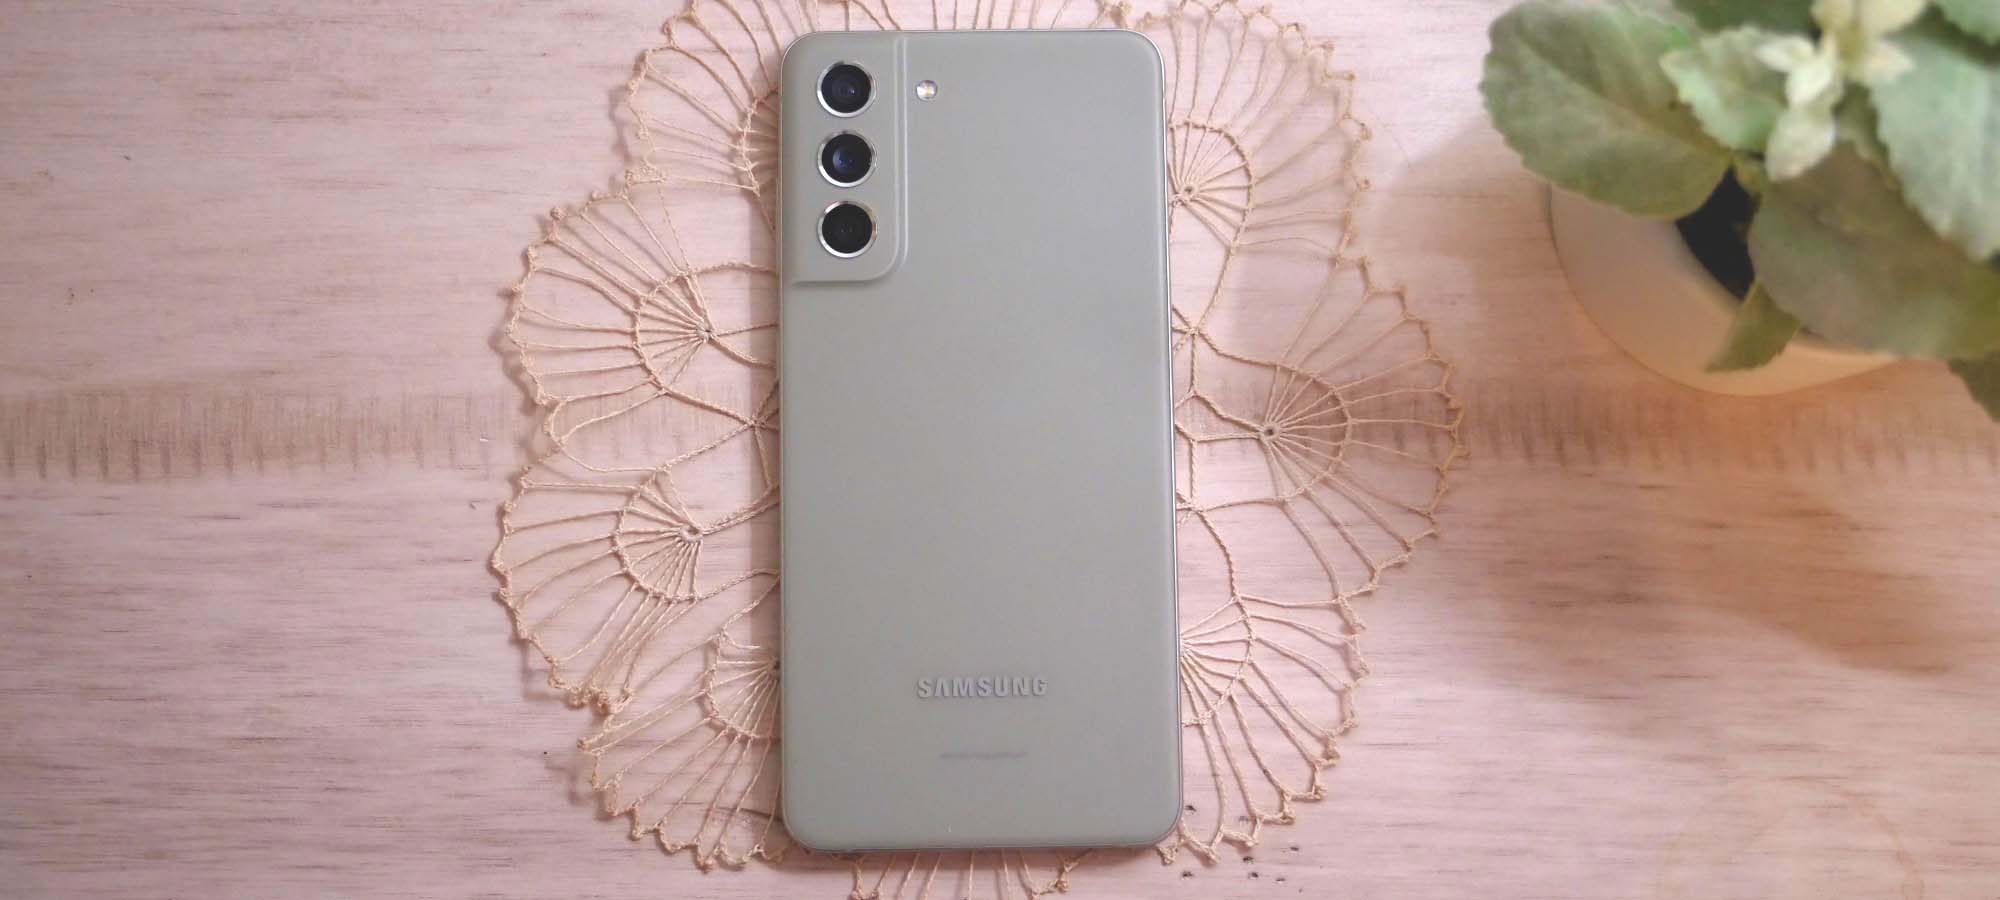 Samsung Galaxy S21 FE 5G hands-on review -  tests